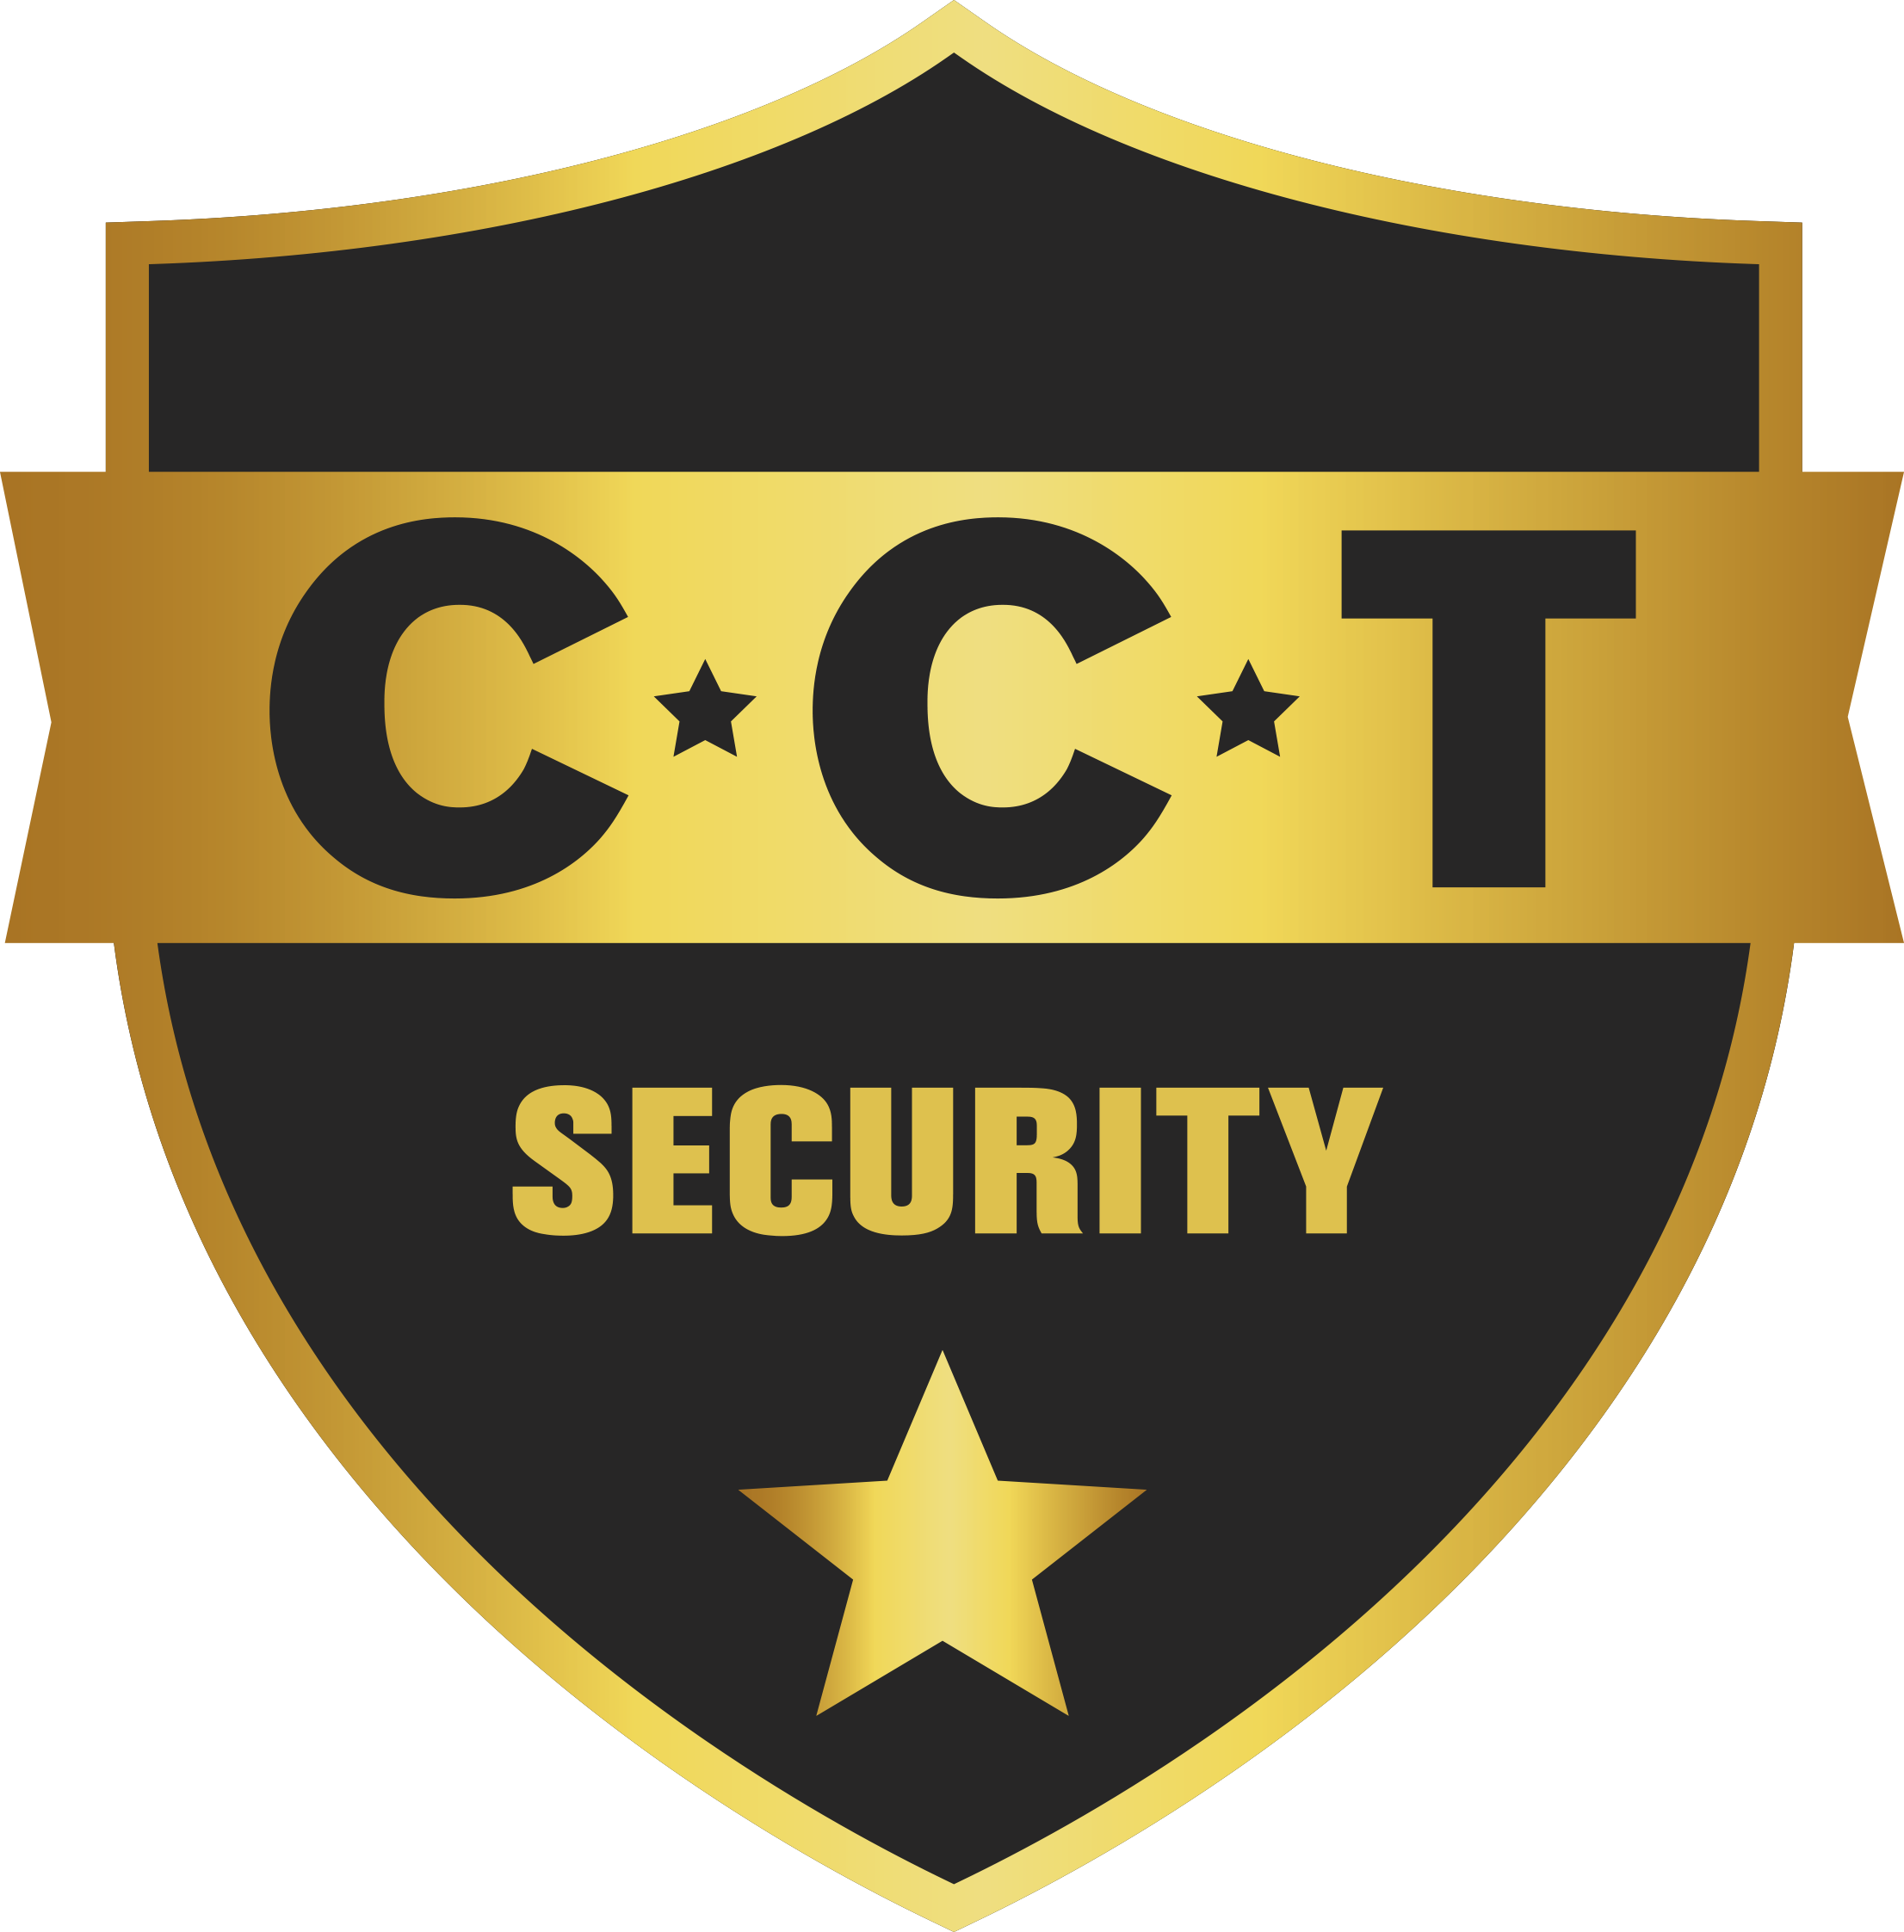 www.cctsecurity.it